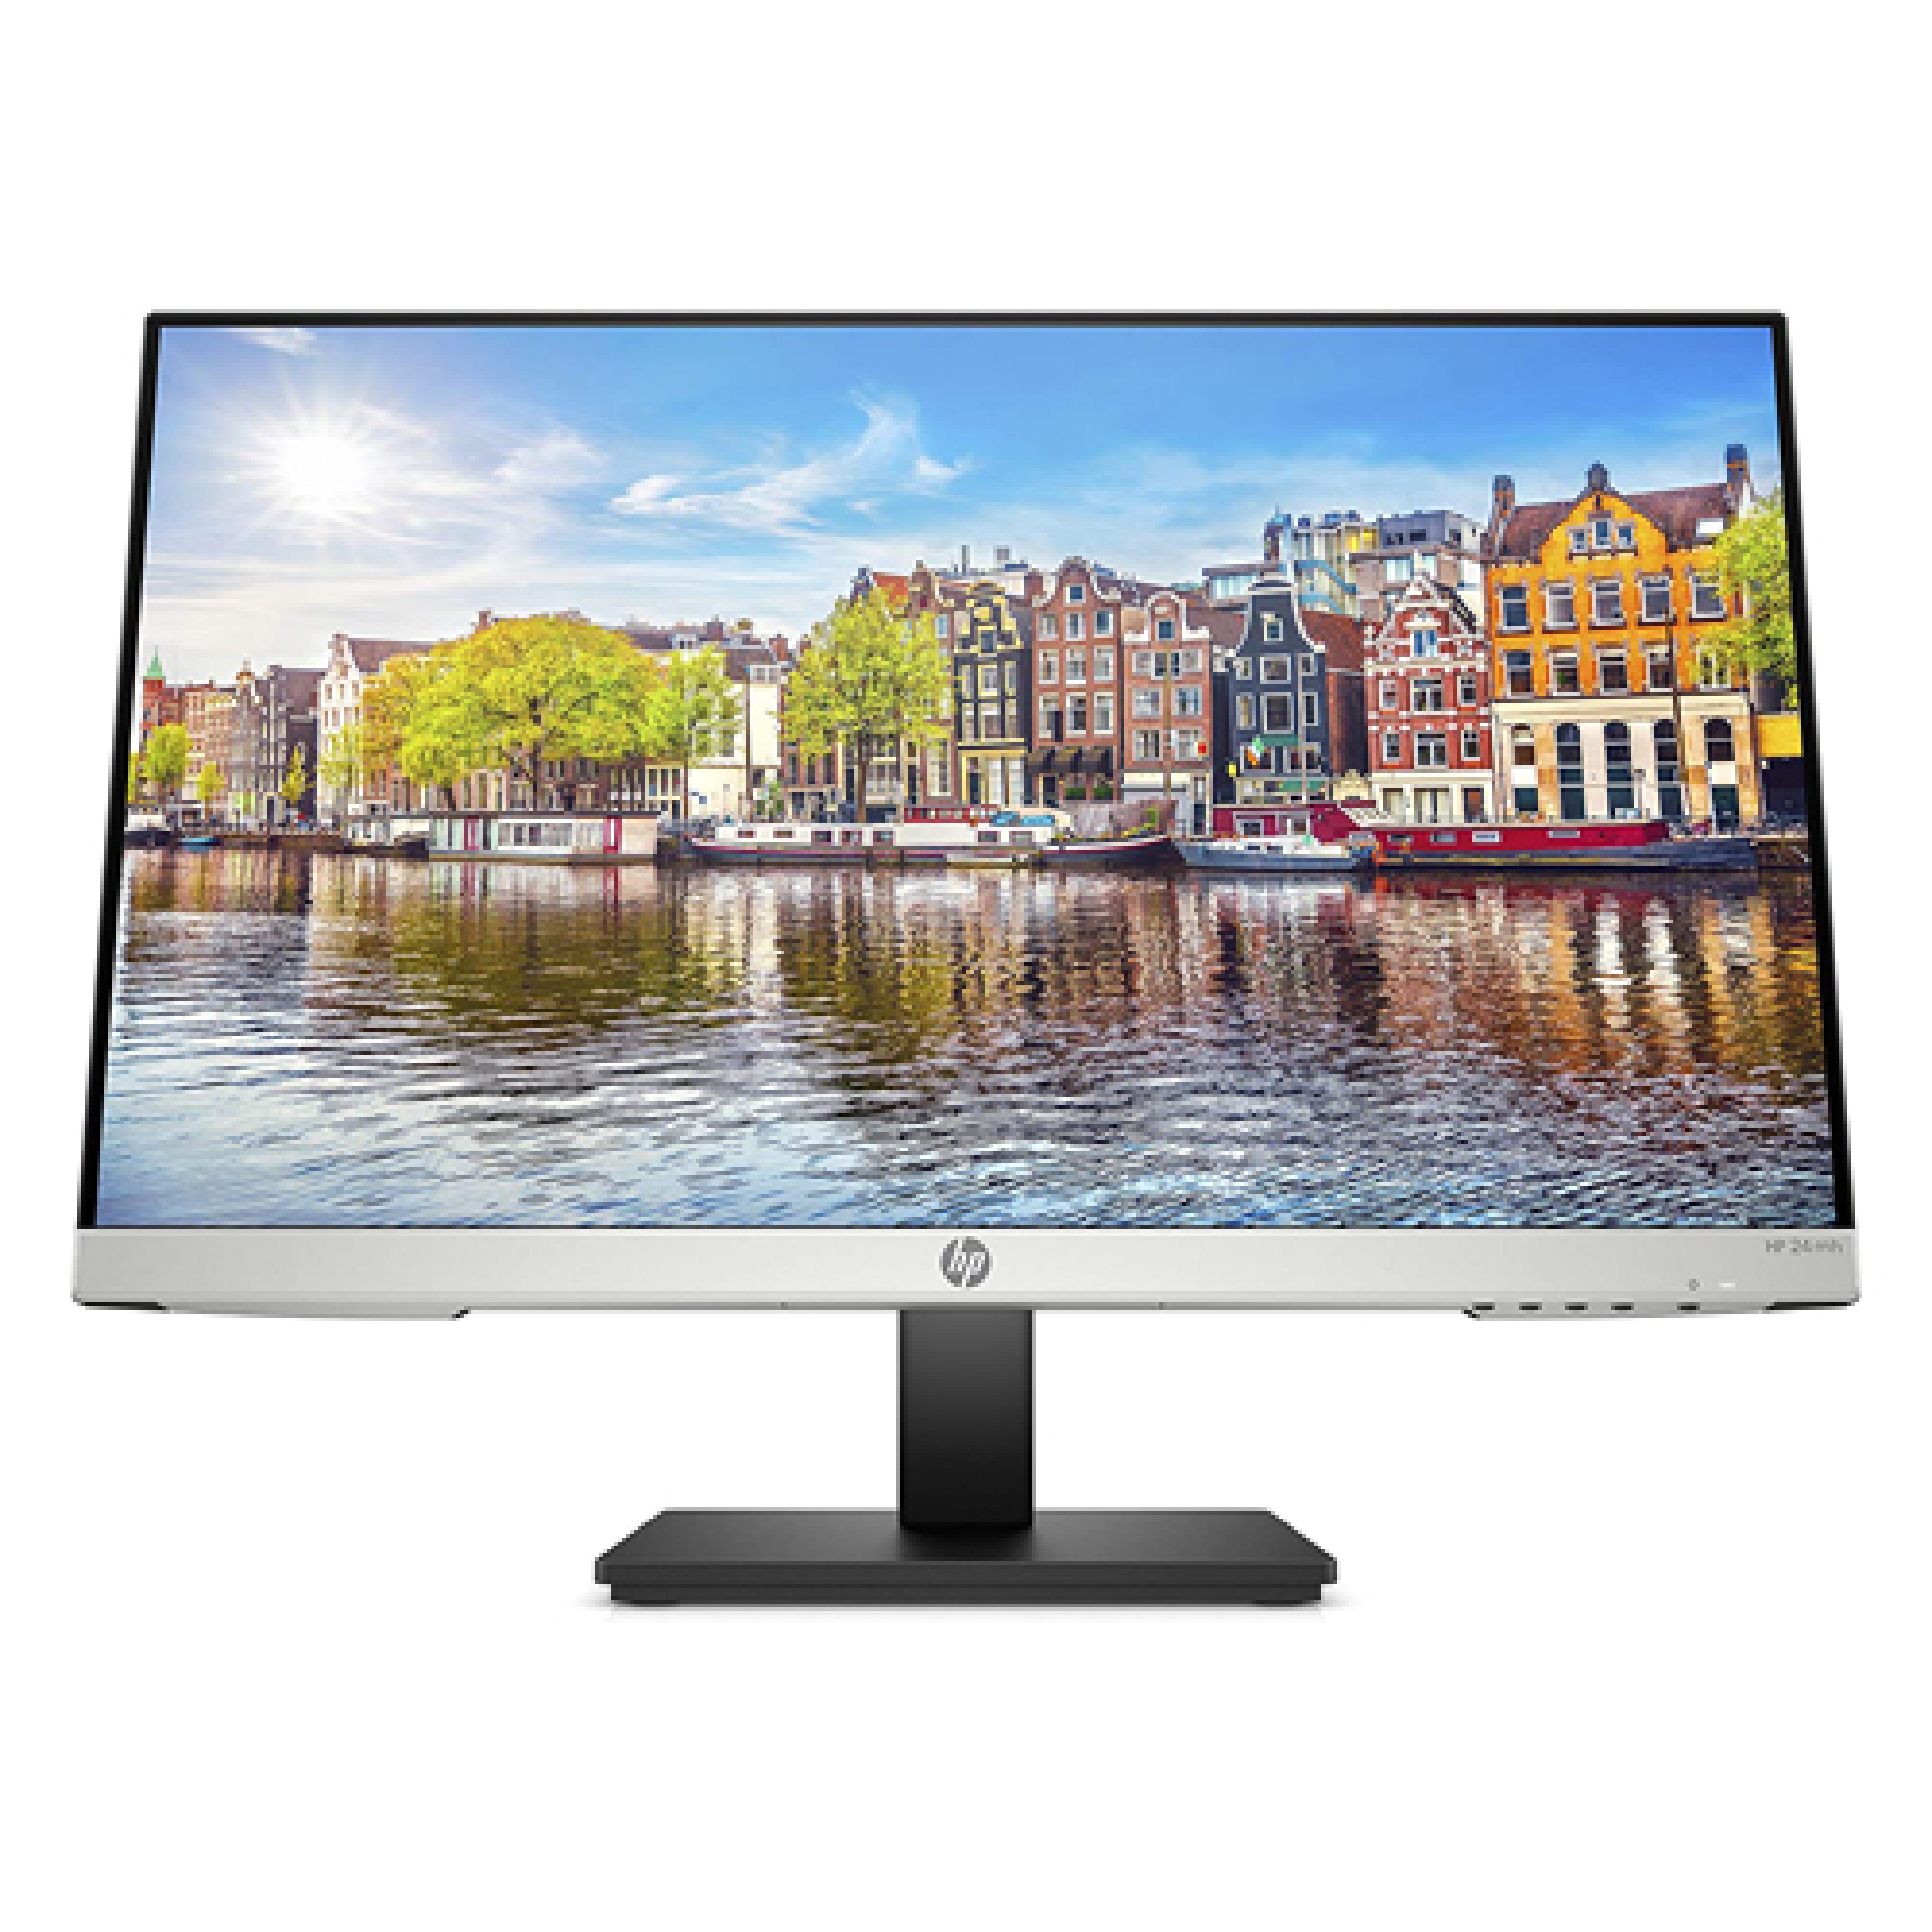 Best Monitor for Trading